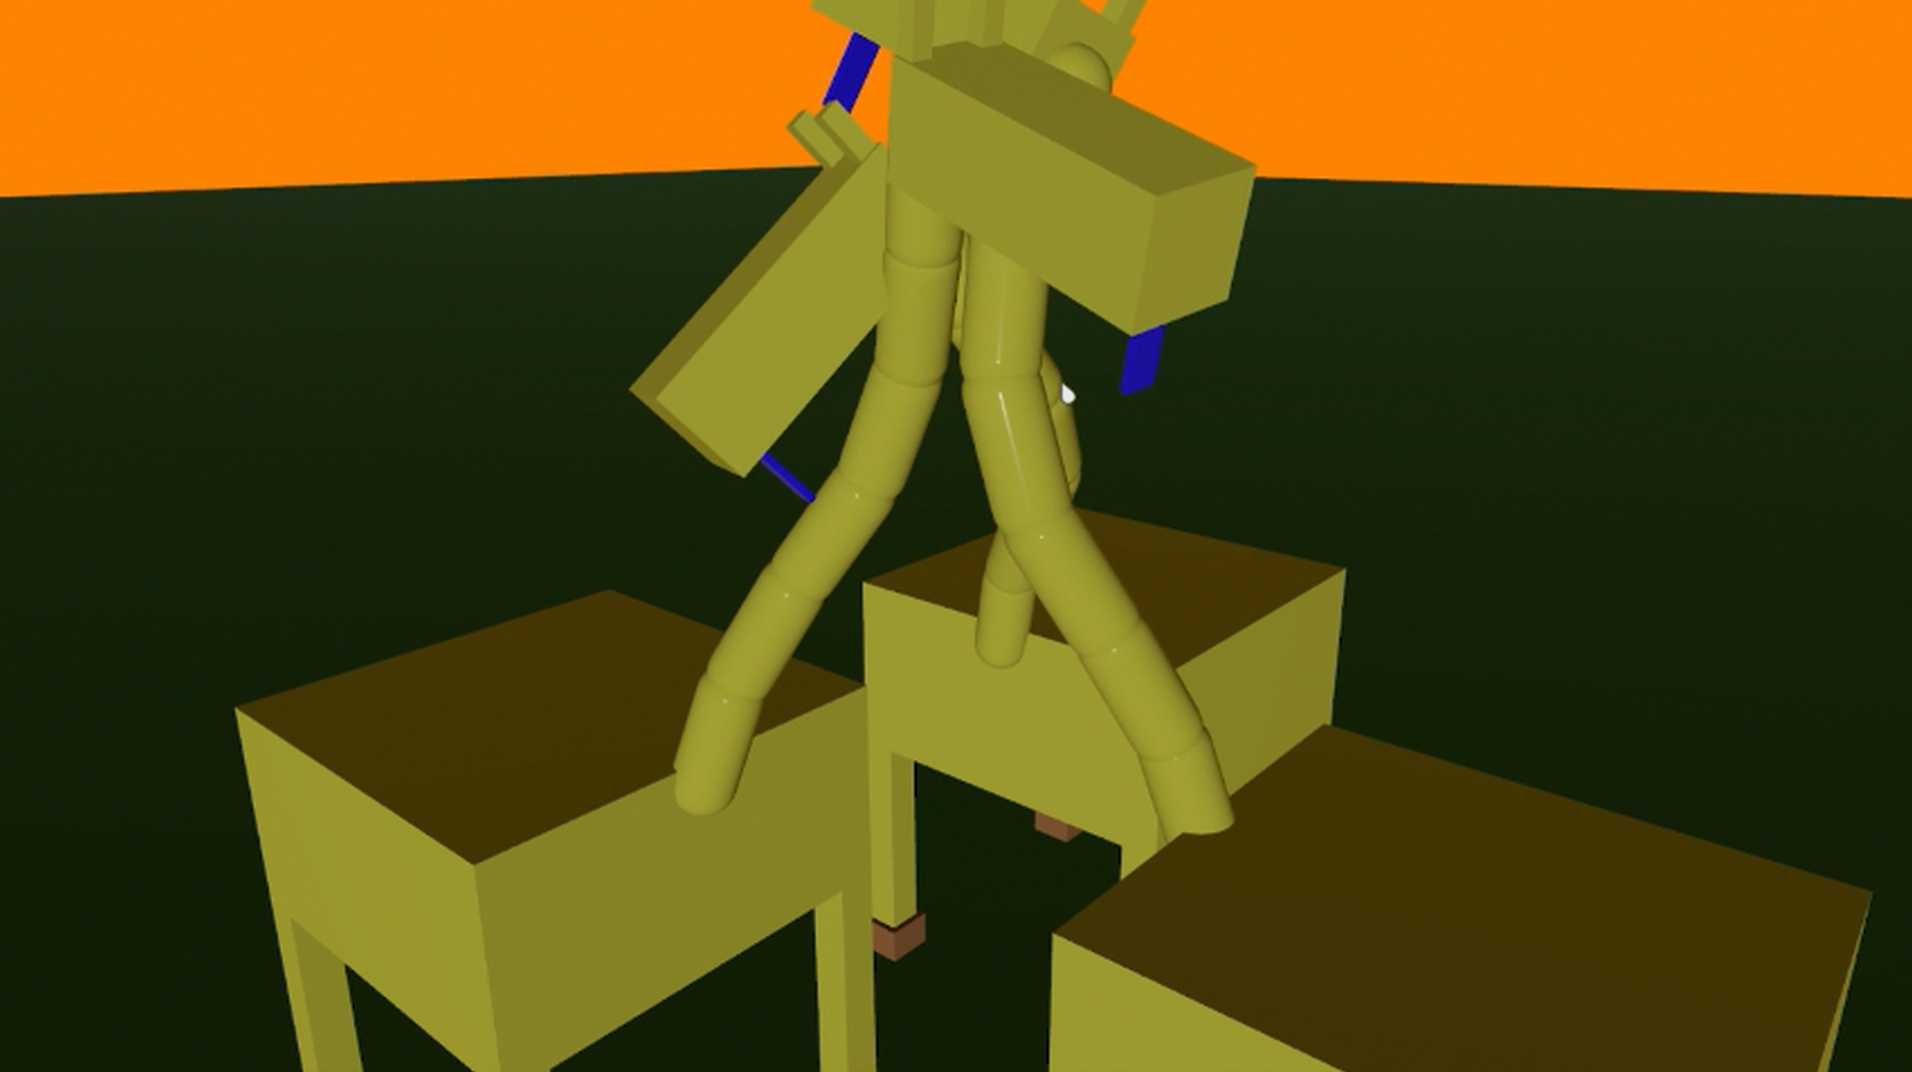 Three giraffes fighting, the giraffes are made of a large yellow box and
  seven default capsule 3d shapes for neck, the heads are also just a single
  box